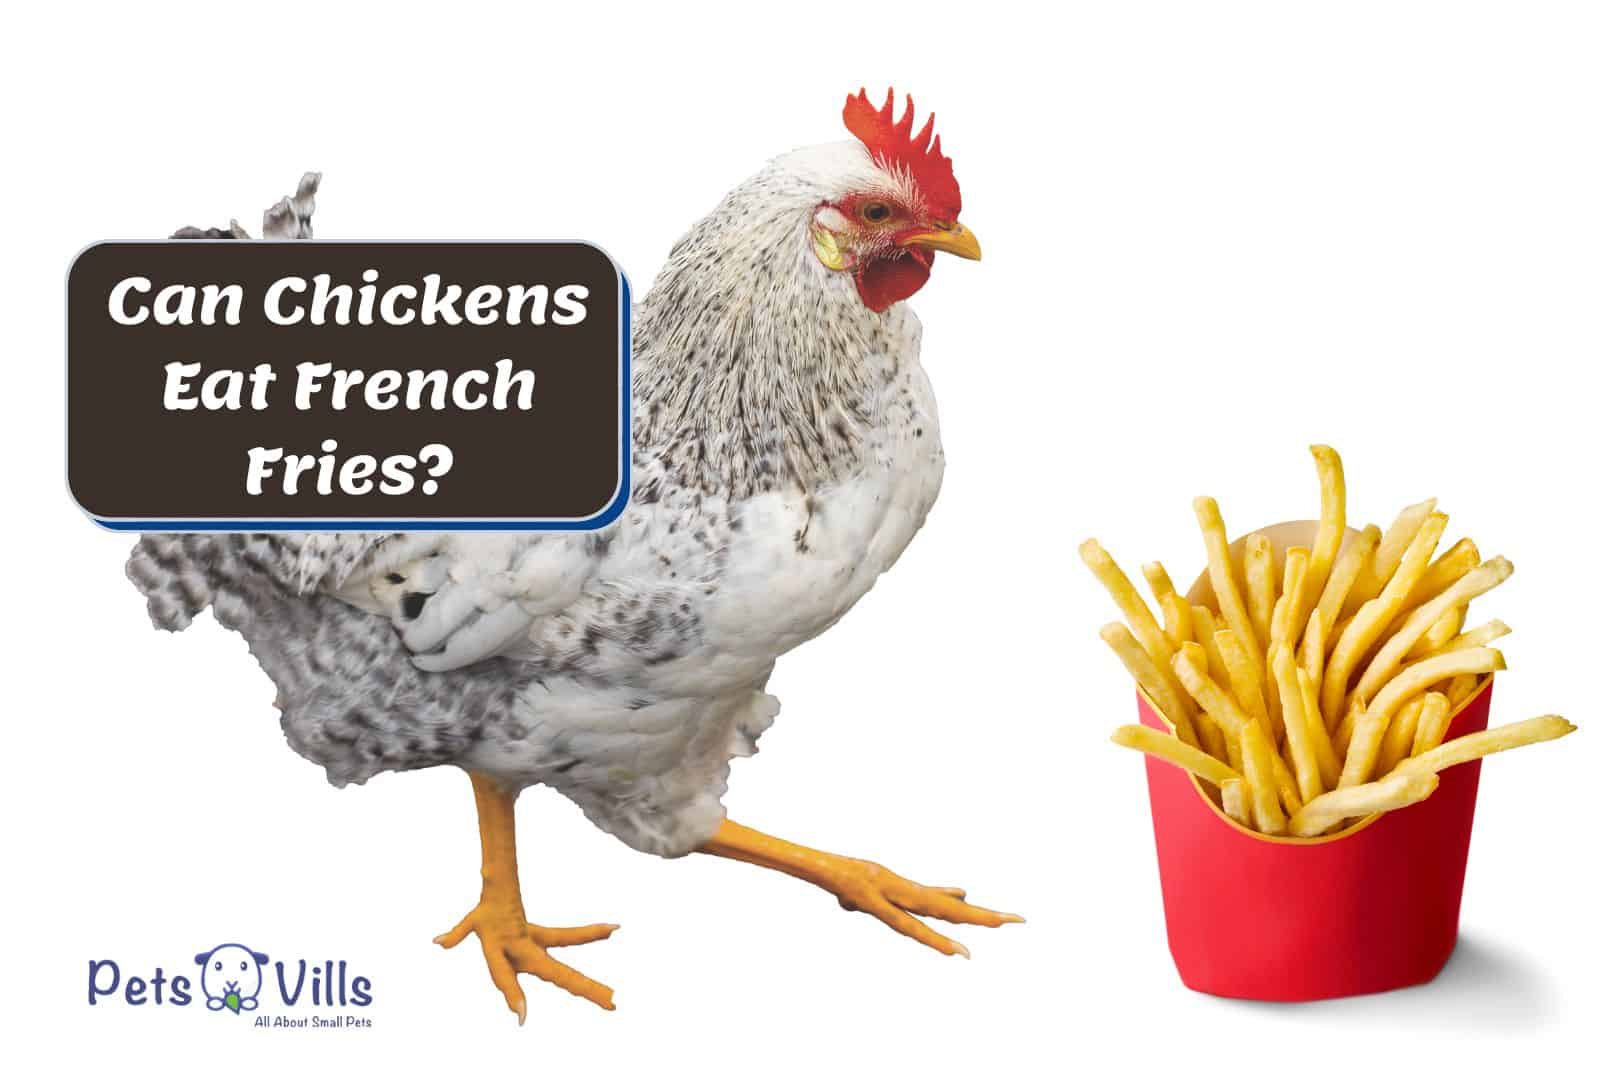 a rooster looking at the fries but Can Chickens Eat French Fries?